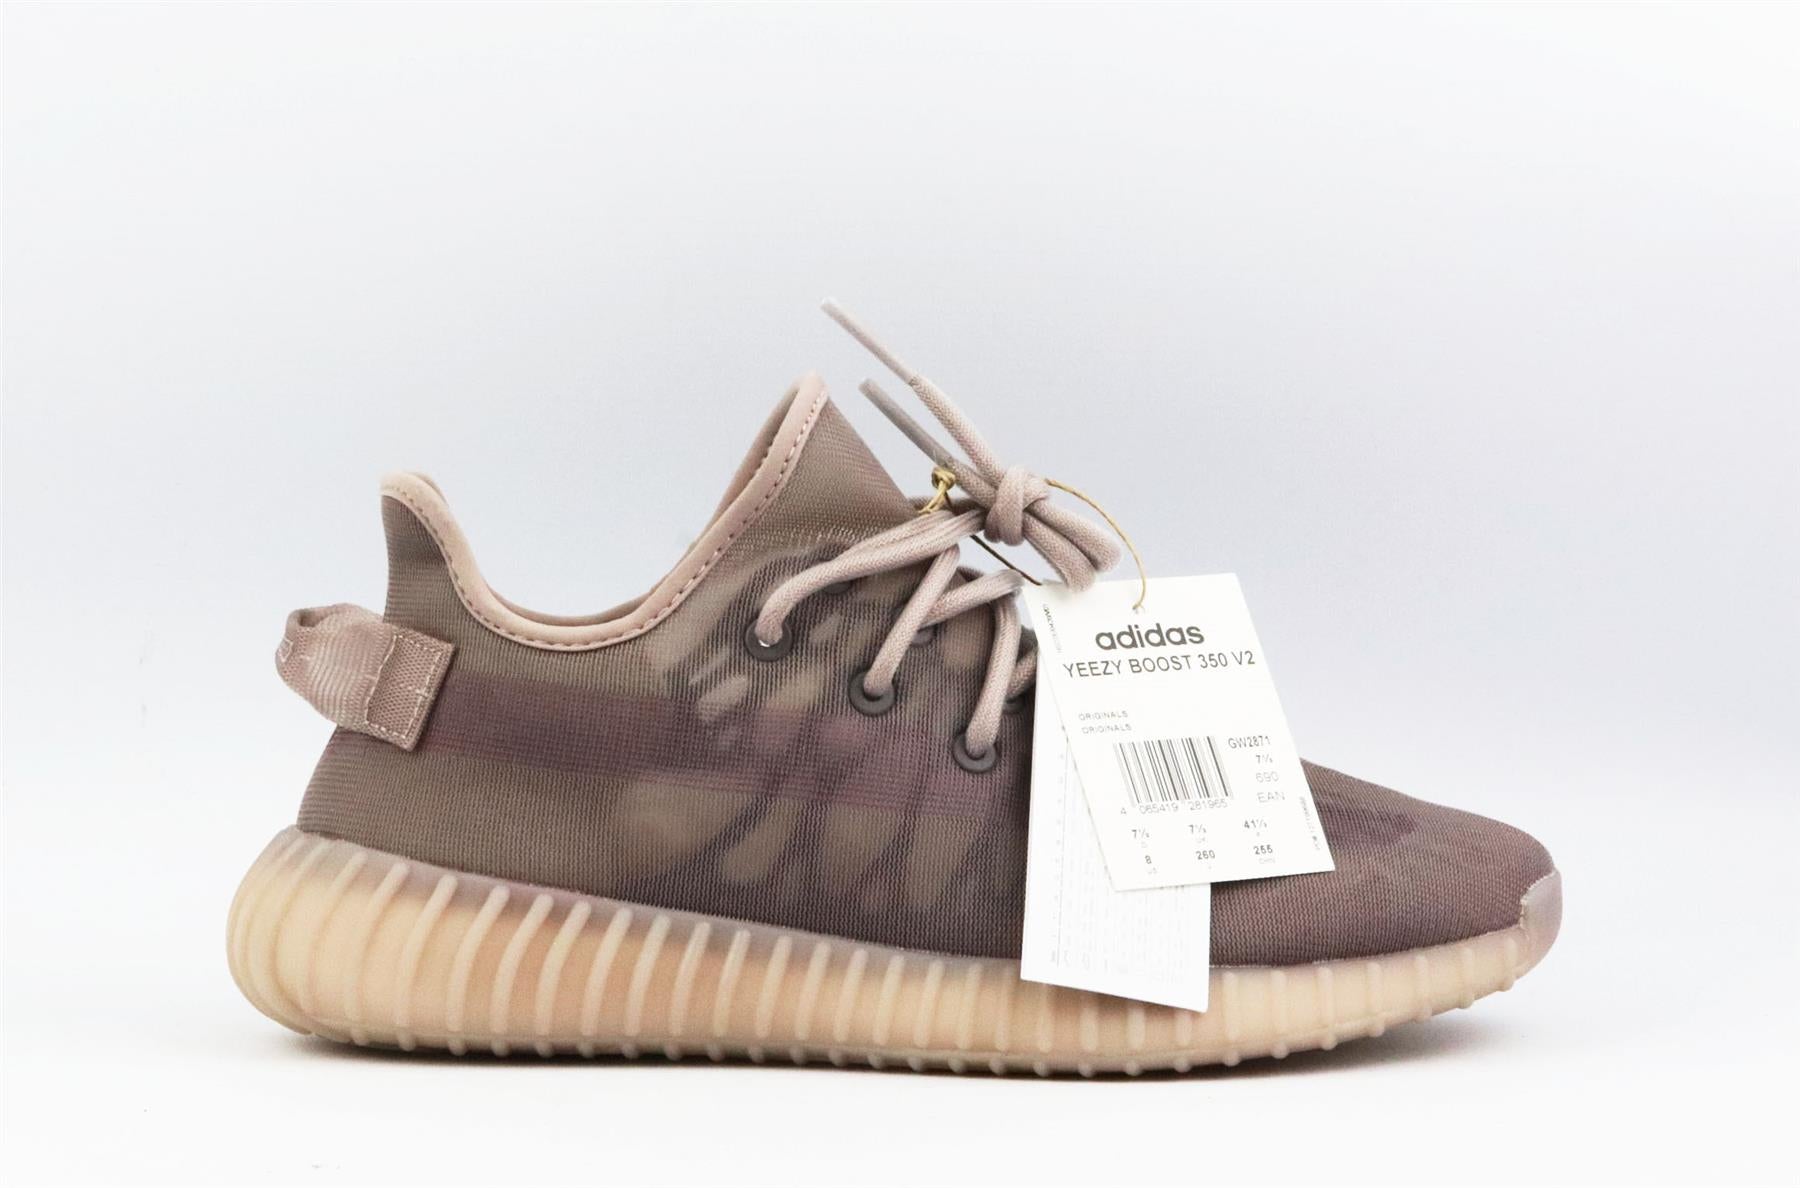 Yeezy x Adidas Brown Suede Boost 350 V2 Oxford Tan Sneakers Size